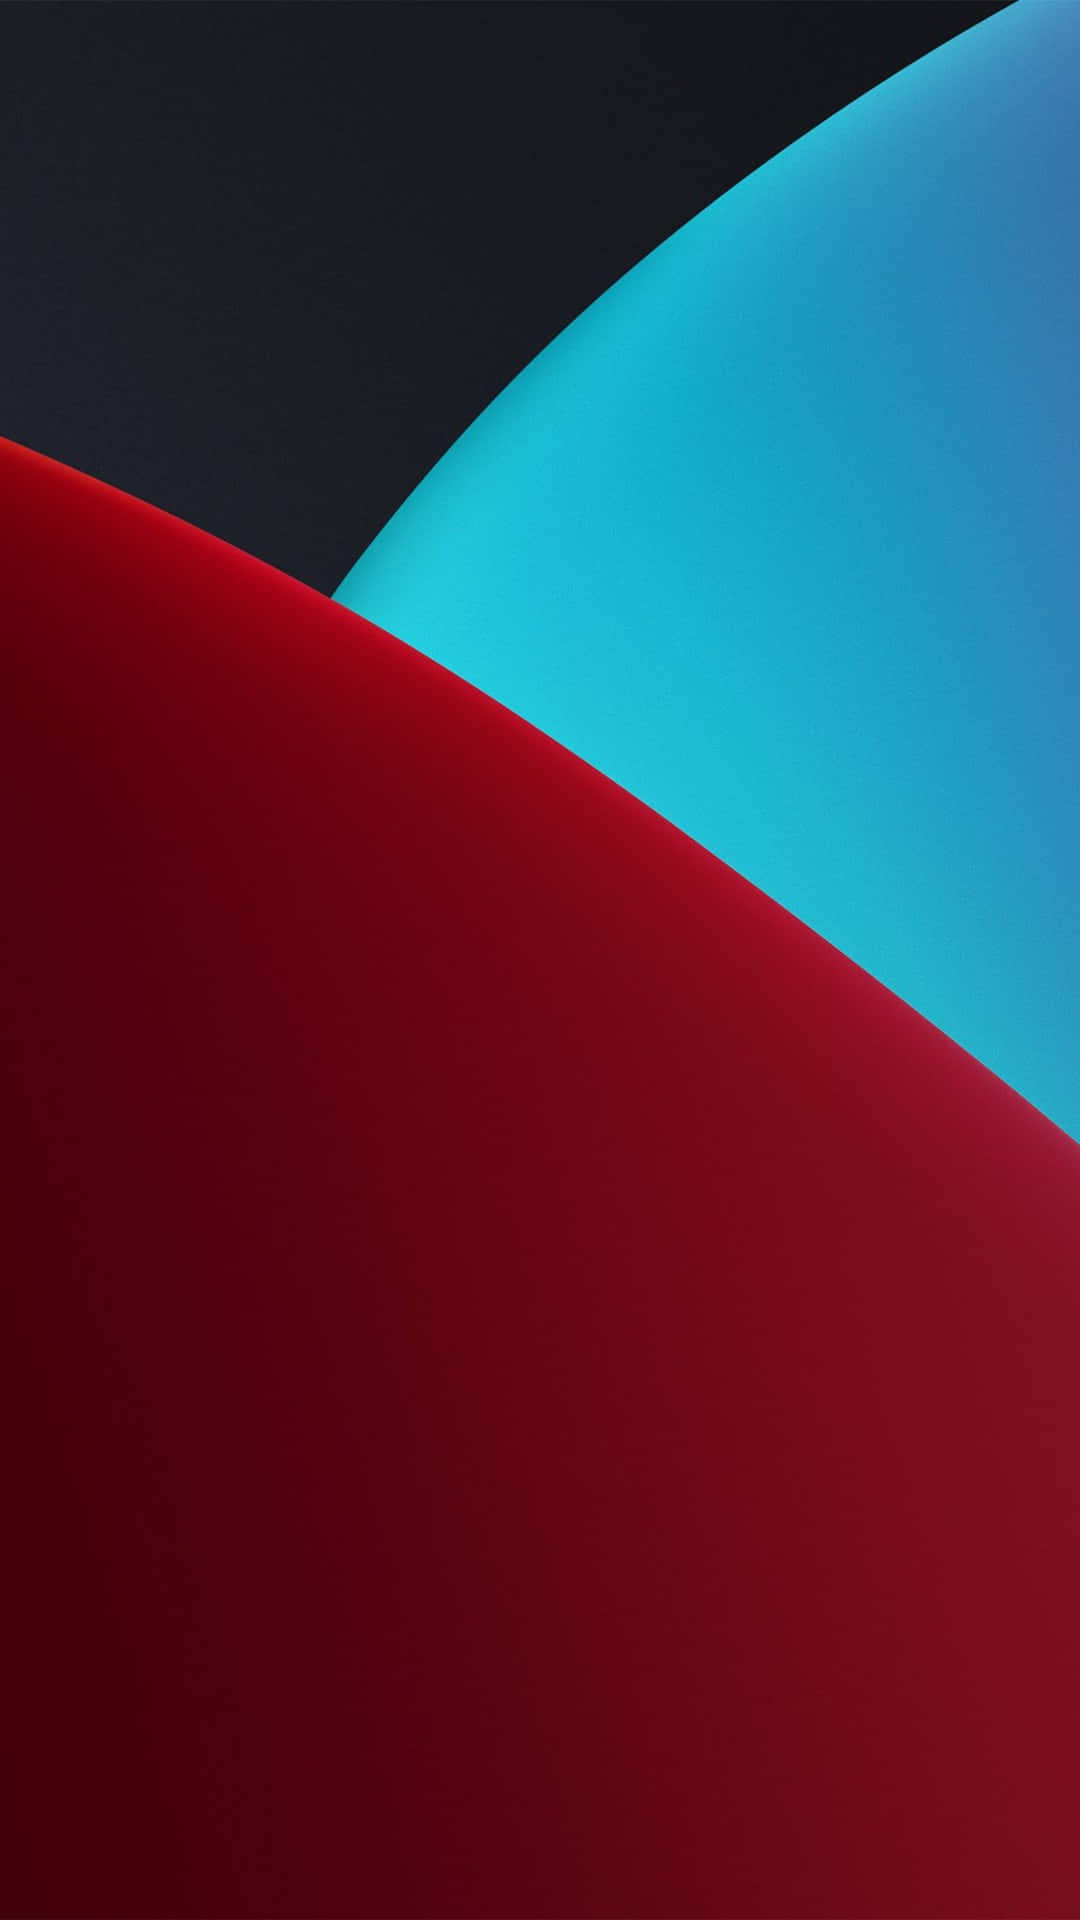 "Be the center of attention with this vibrant red and blue iPhone design!" Wallpaper